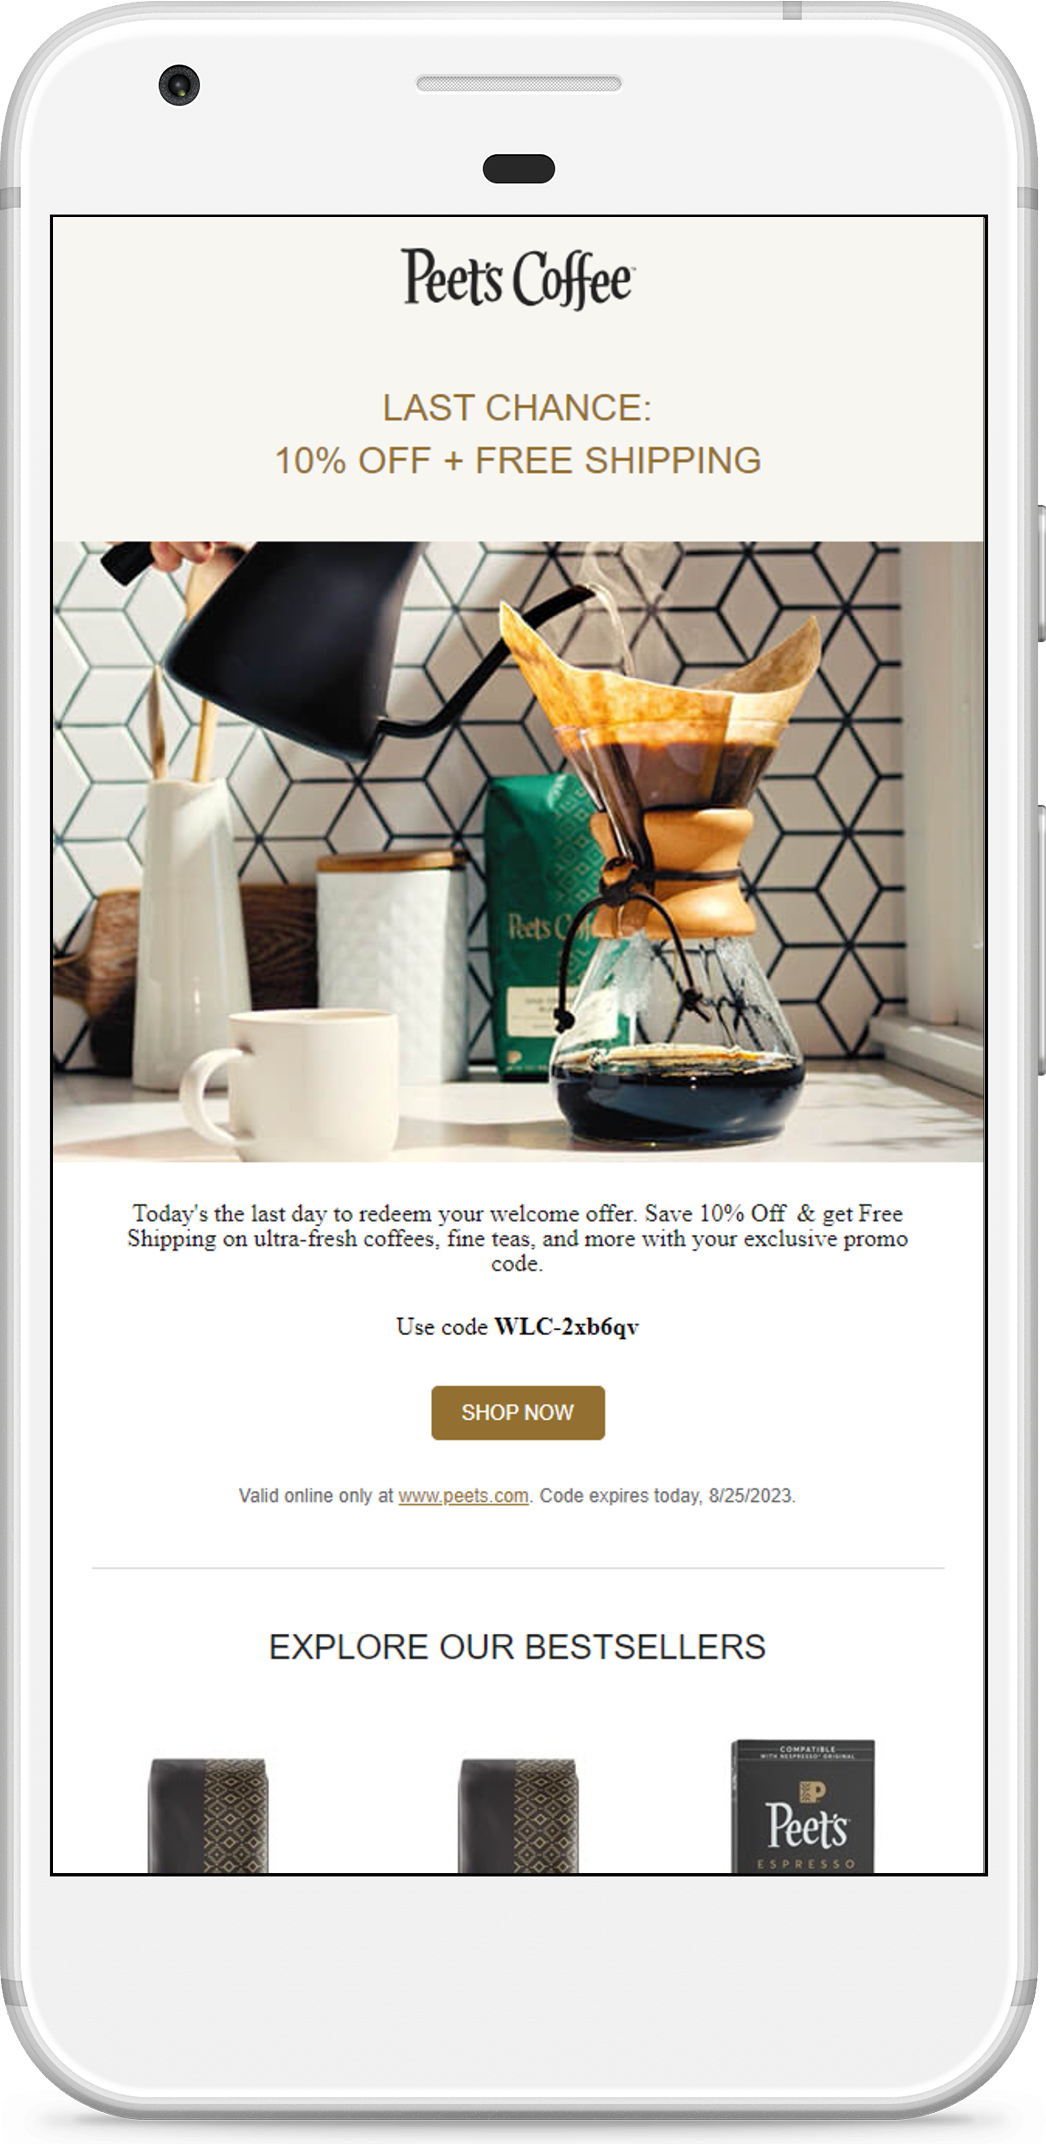 Peets Coffee Promotional Email